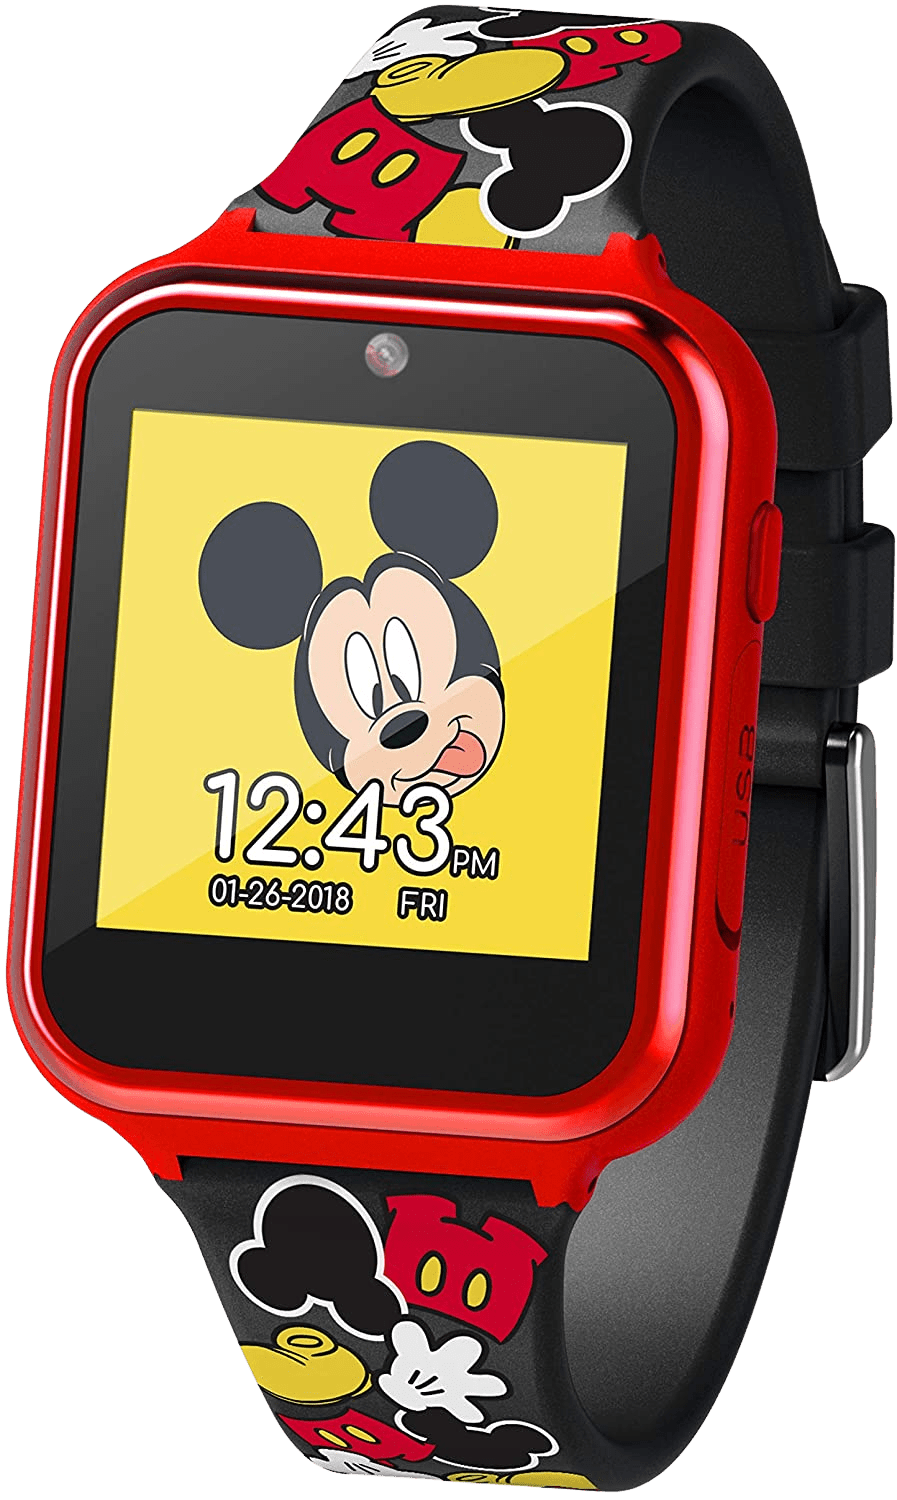 Disney Boys' Touchscreen Smart Watch with Plastic Strap, Black, 20 (Model: MK4089AZ) - Home Decor Gifts and More